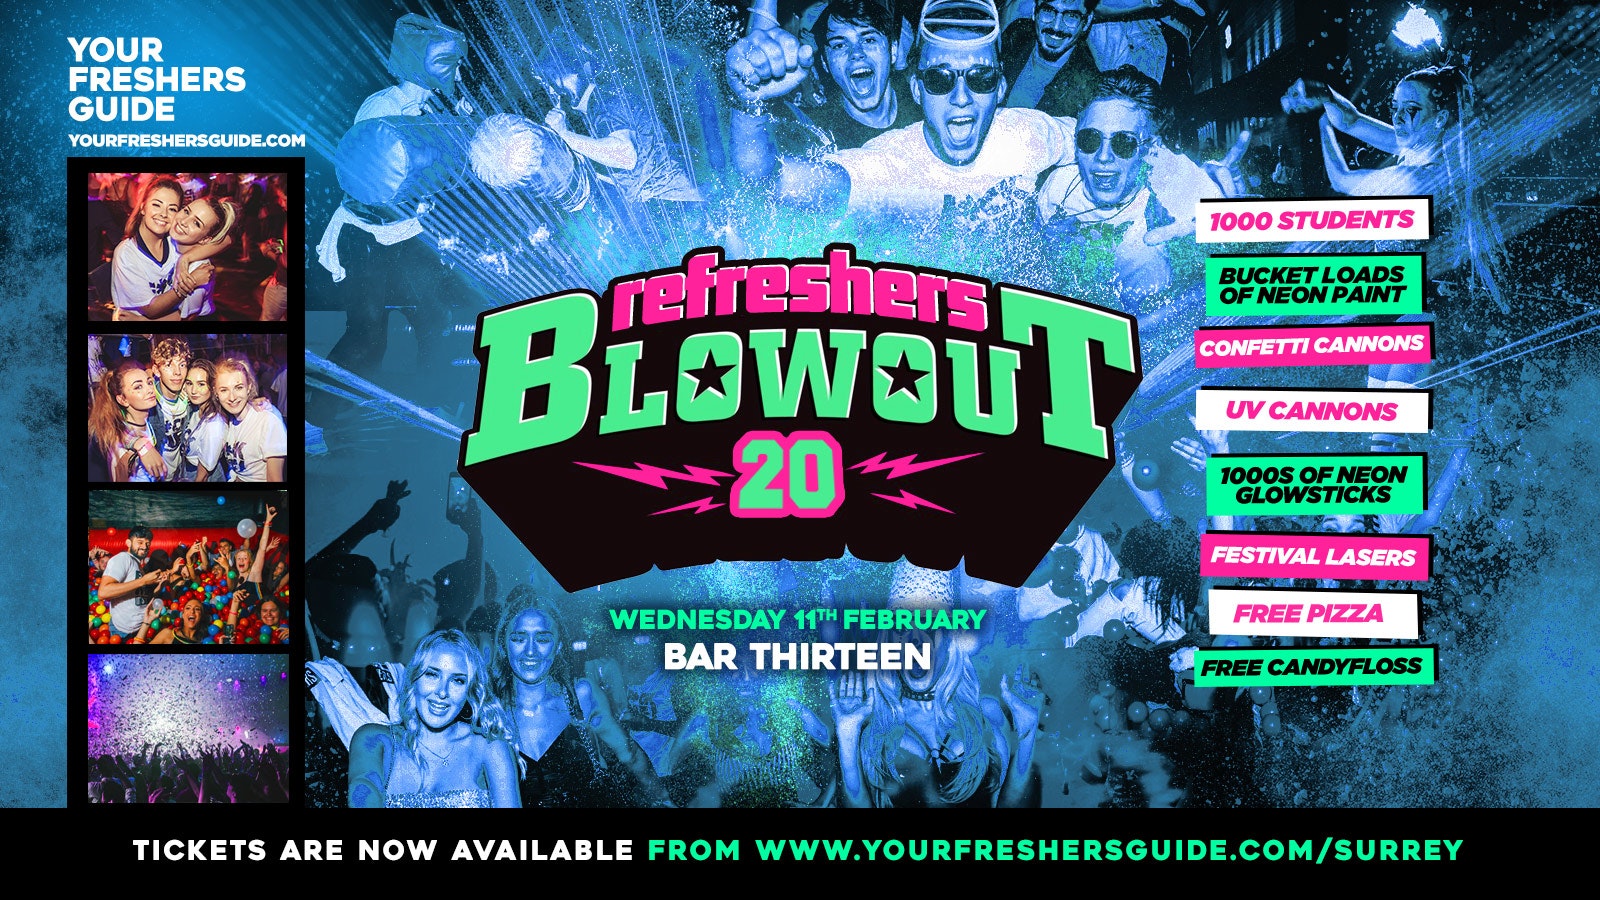 Last 50 Tickets! – The Refreshers Blowout – Surrey / Guildford